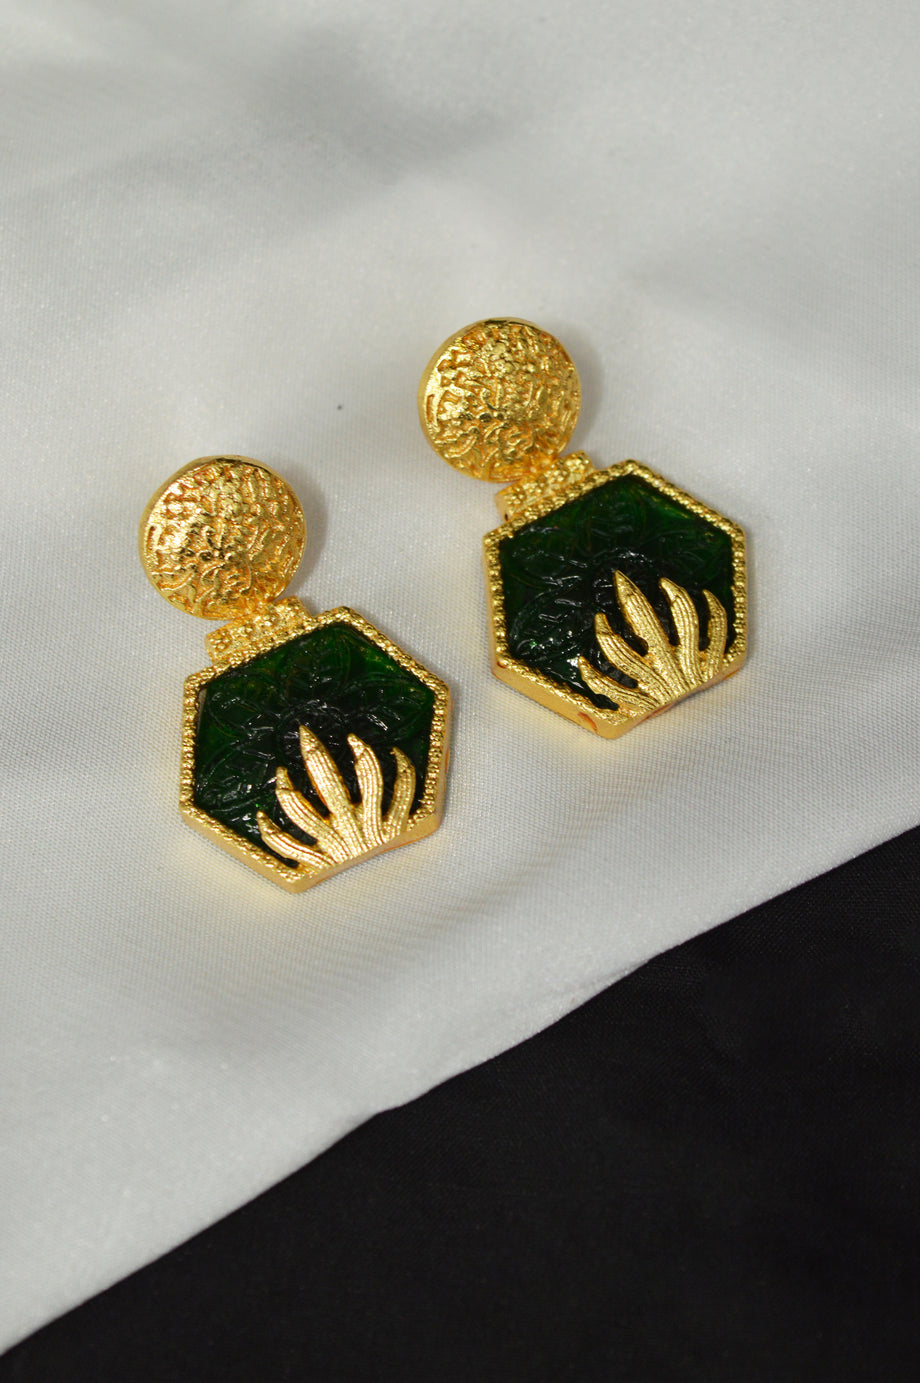 Discover 185+ green stone stud earrings gold super hot